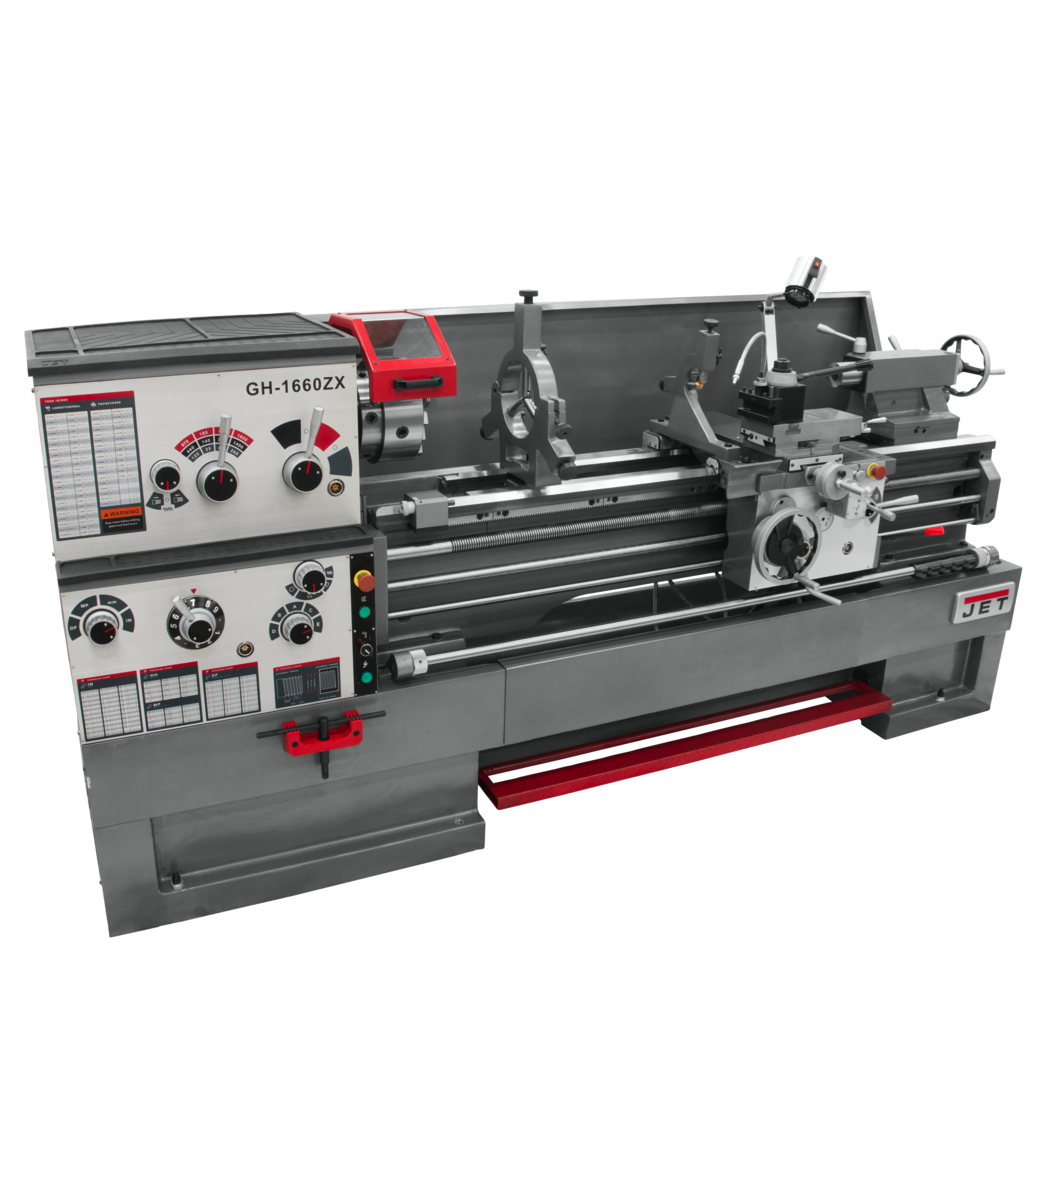 321477, GH-1660ZX TAK Lathe with Taper Attachment Installed, Jet, Metalworking, Turning, Lathes